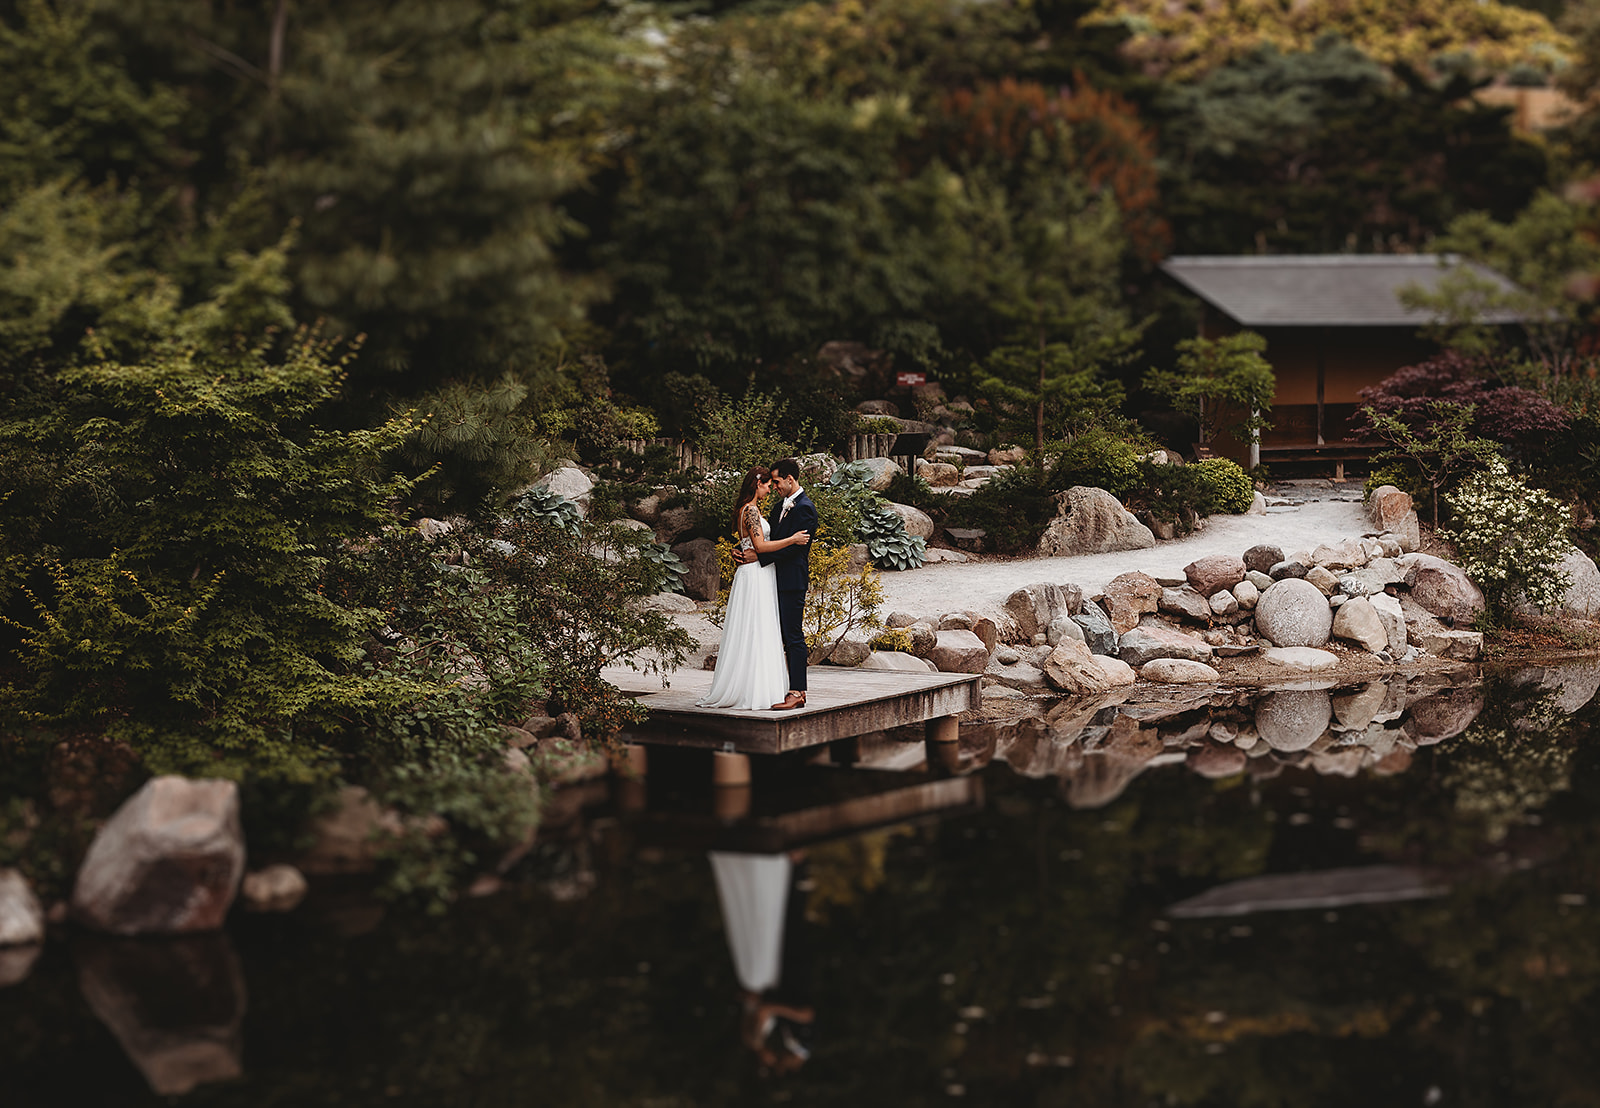 A bride and groom pose for a portrait in the Japanese Garden at Meijer Gardens